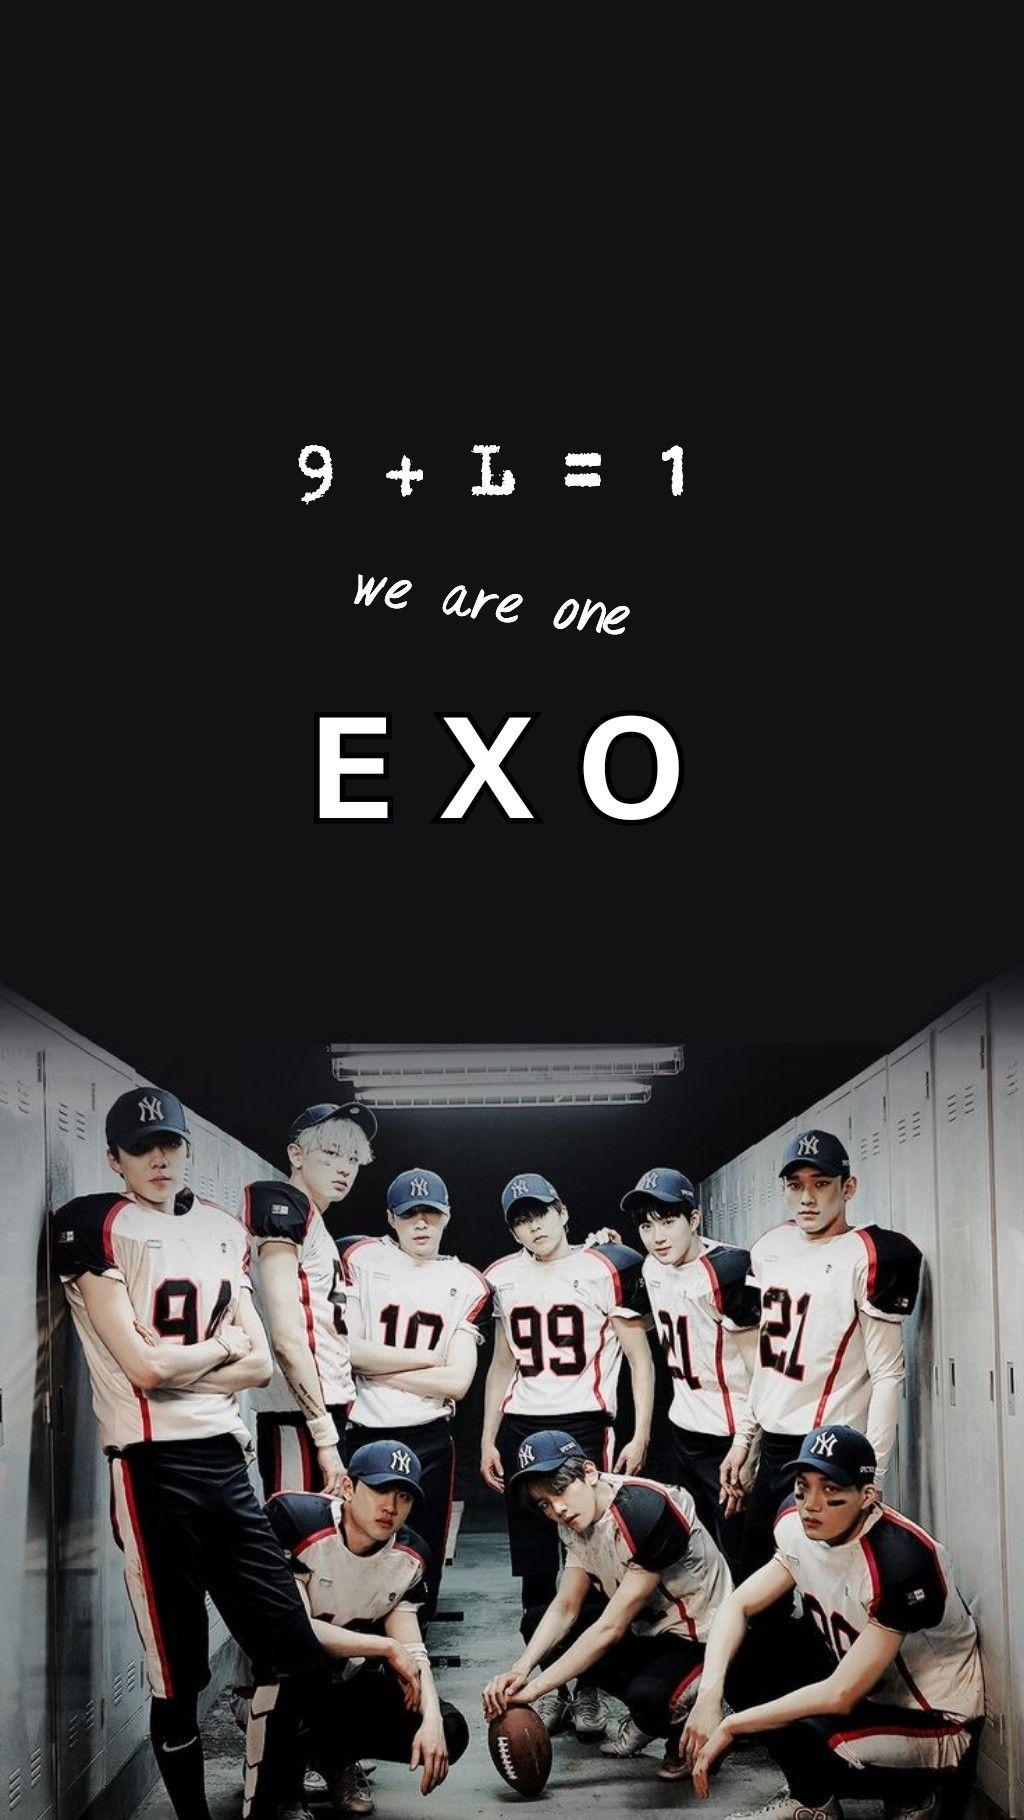 exo we are one wallpaper #ot9 #exo #lay #chen #xiumin #suho